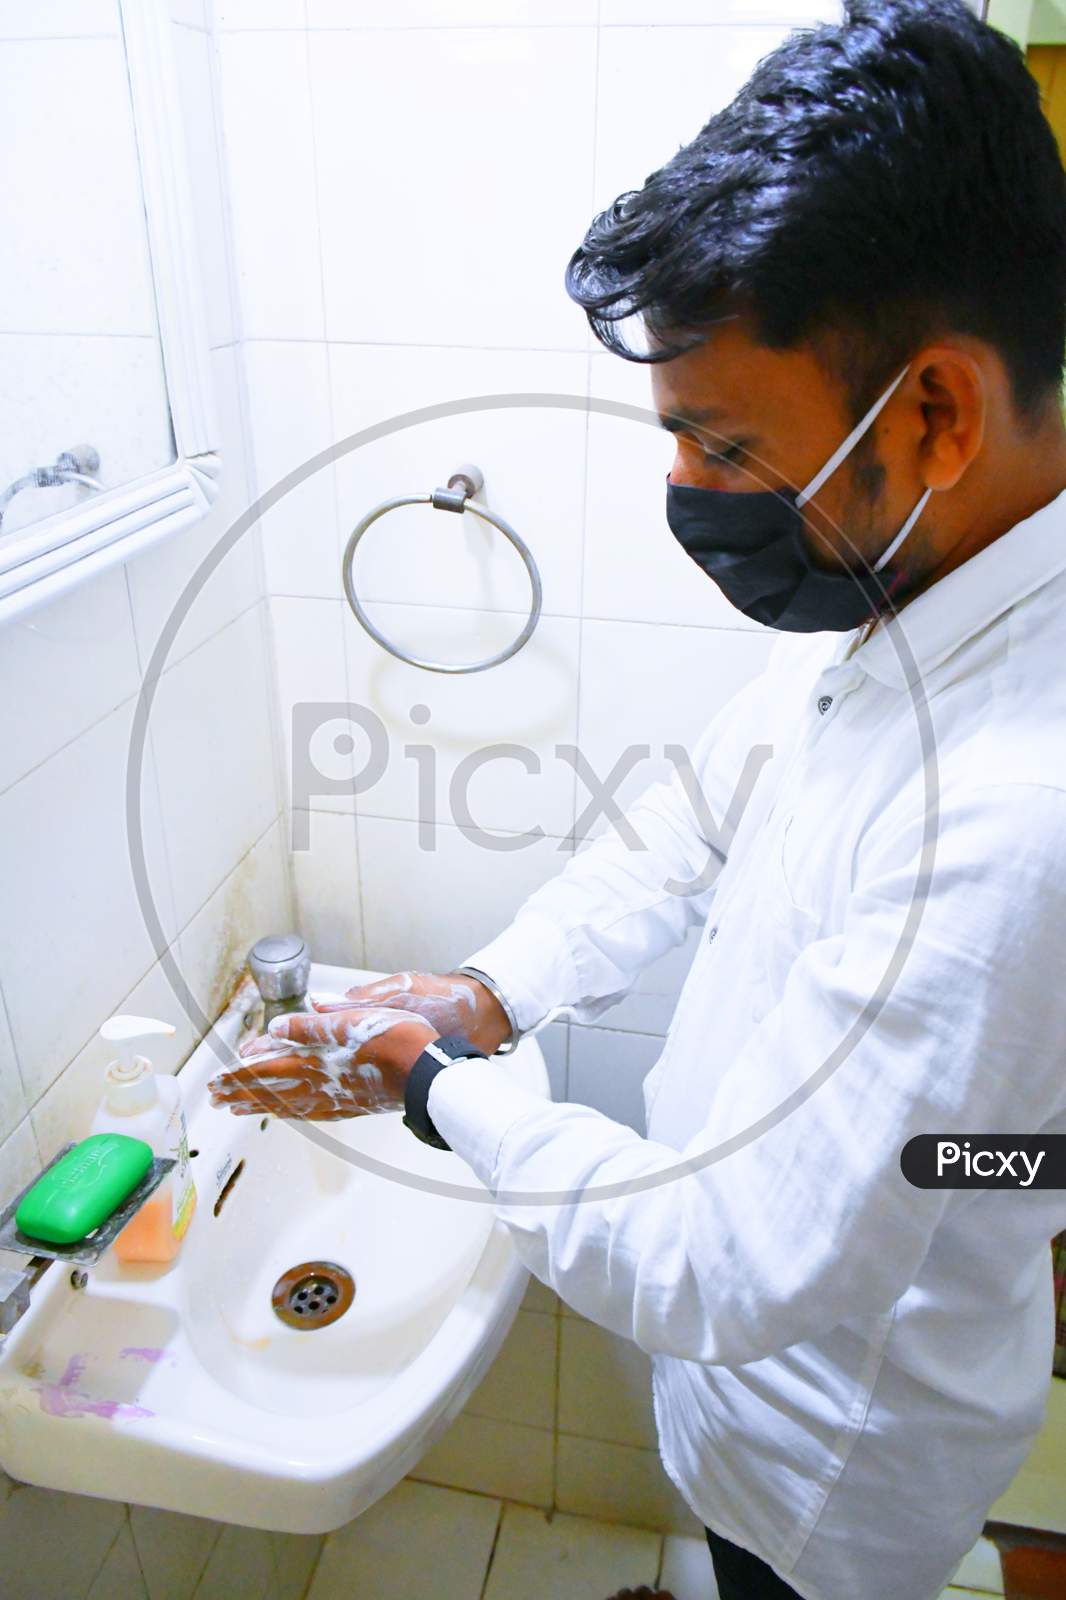 Washing hands rubbing with soap man for corona virus prevention, hygiene to stop spreading coronavirus. India